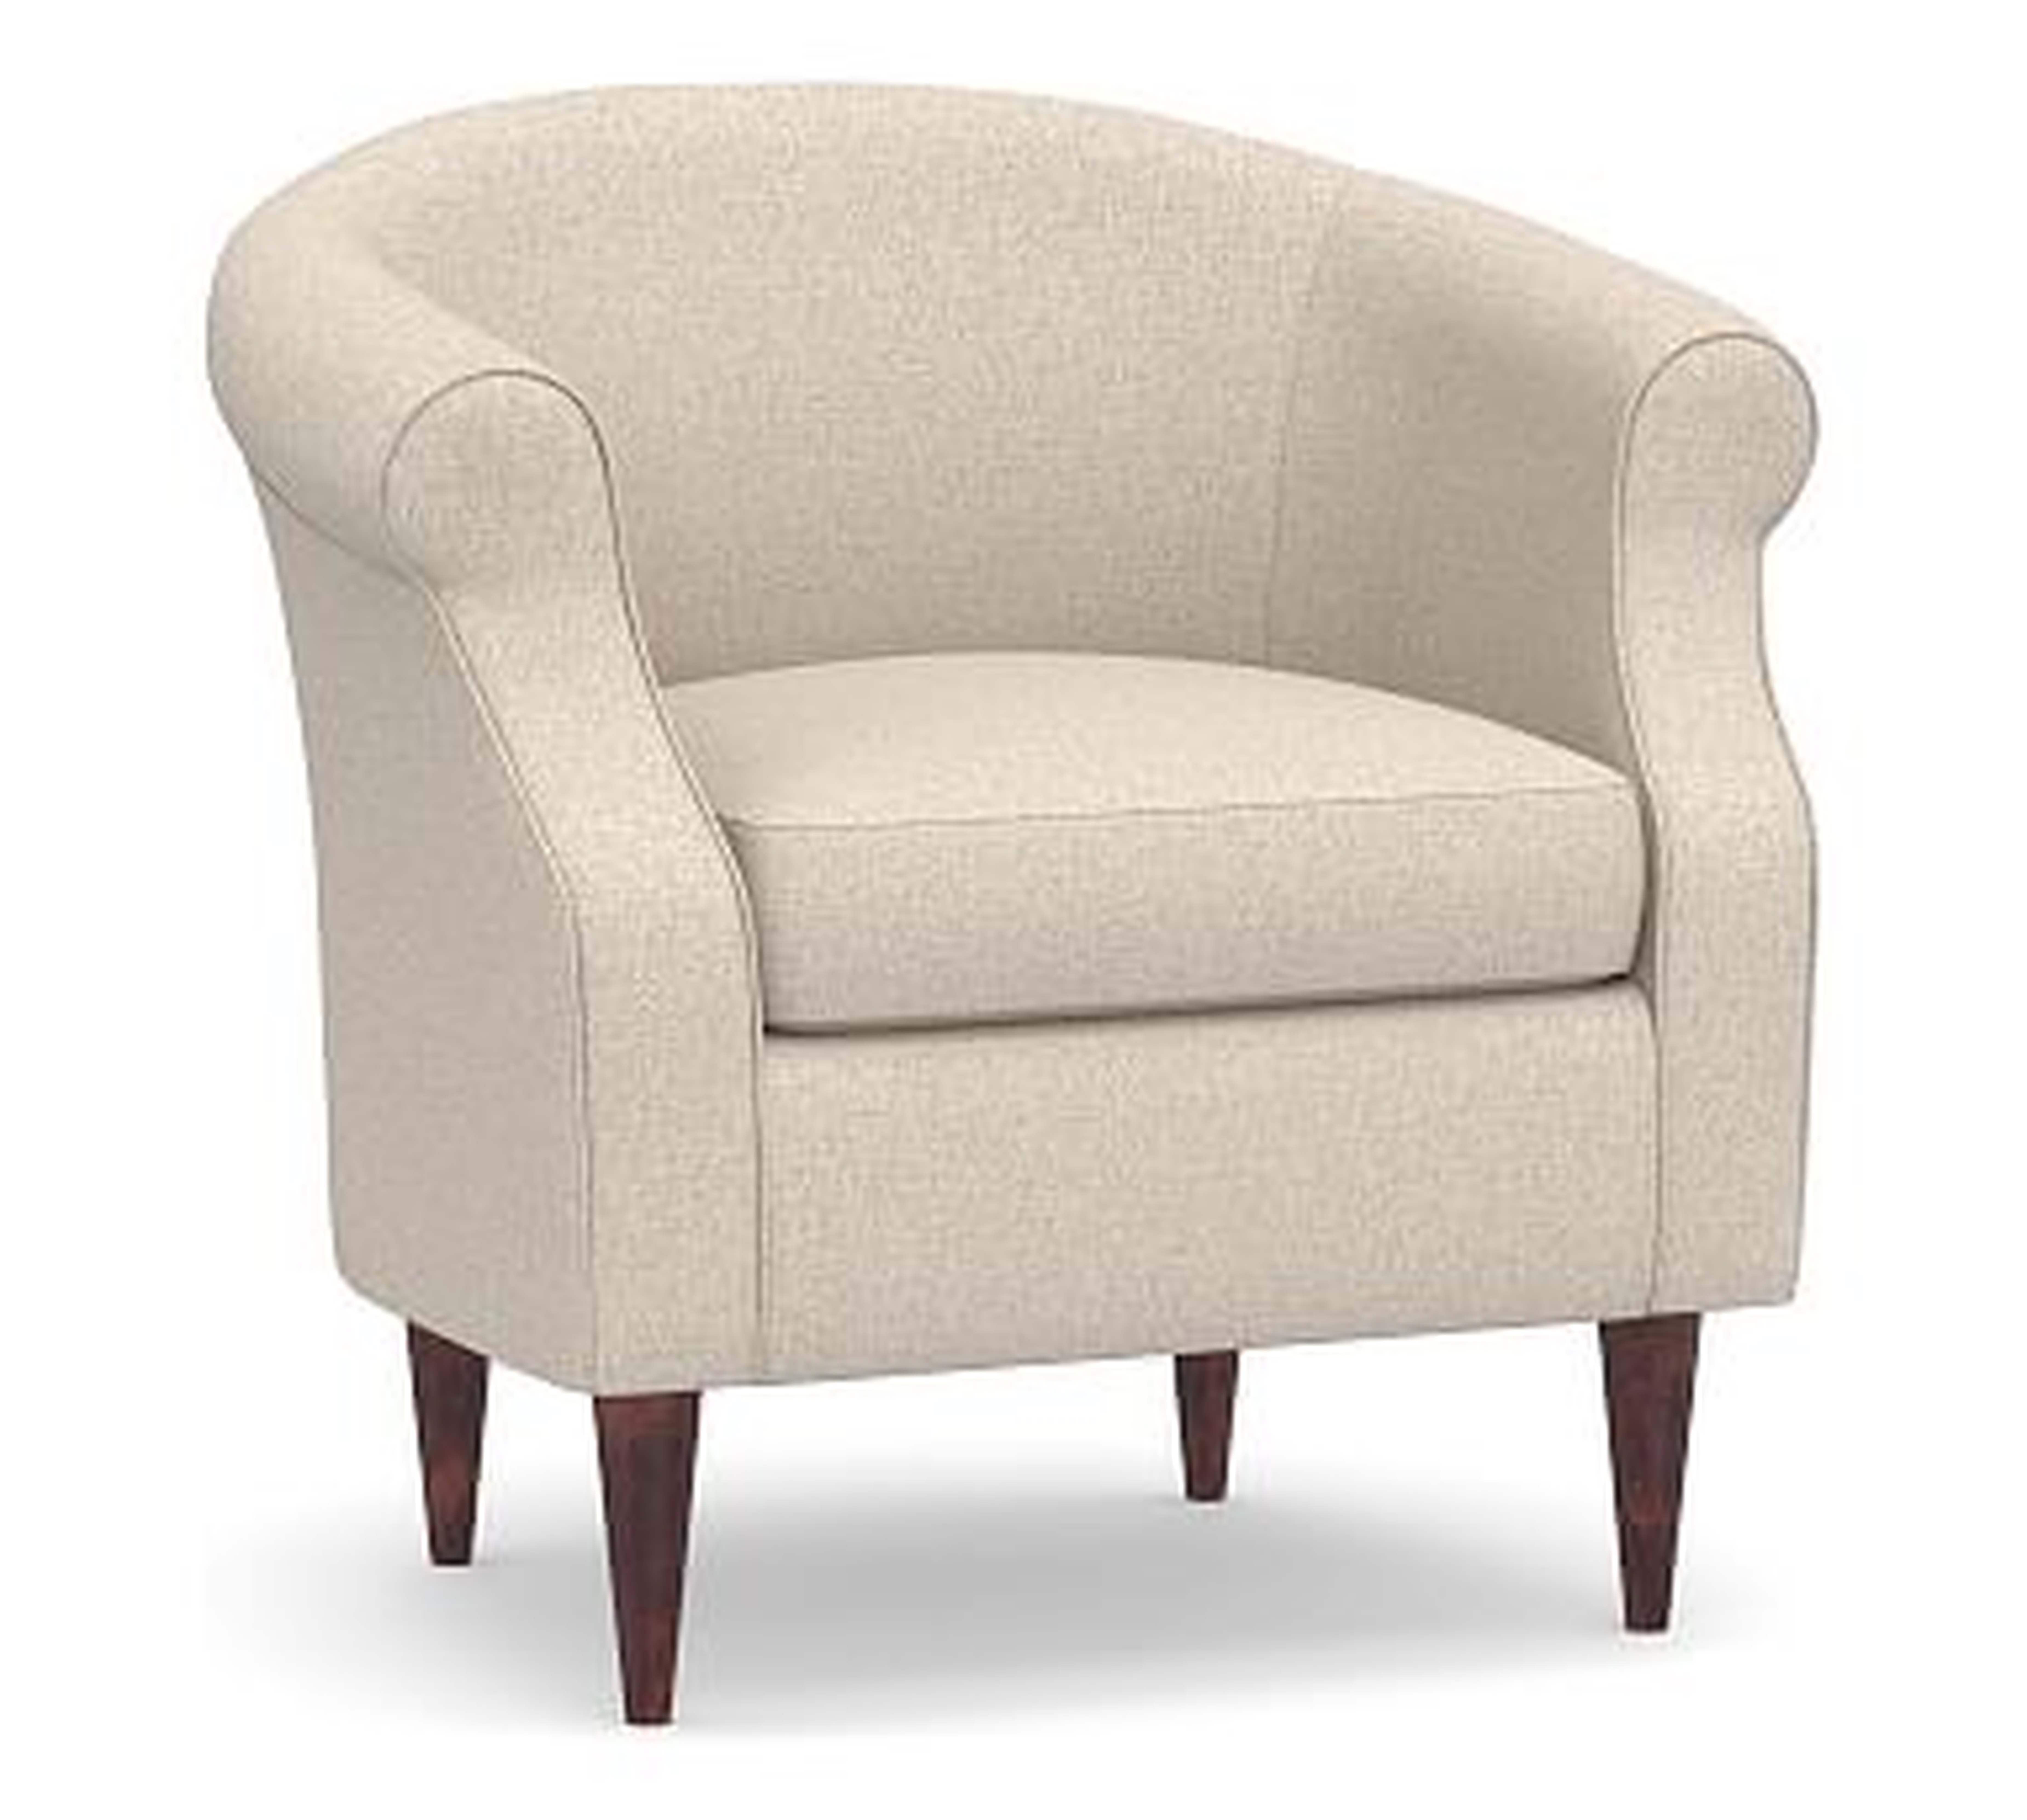 SoMa Lyndon Upholstered Armchair, Polyester Wrapped Cushions, Textured Twill Khaki - Pottery Barn